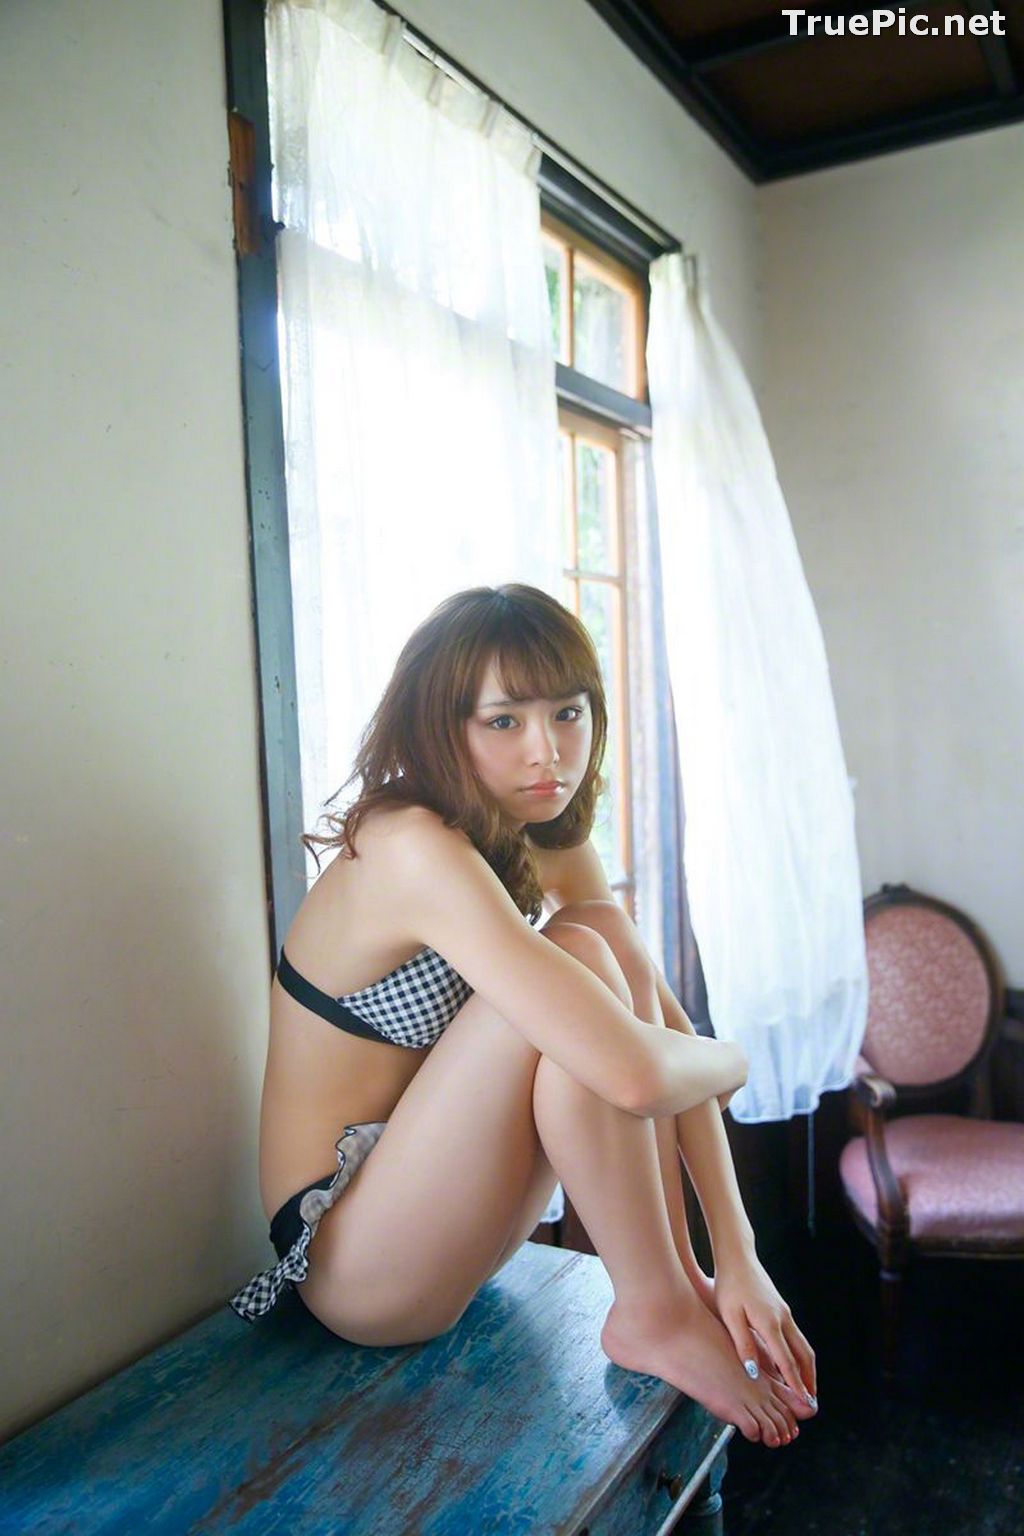 Image Wanibooks No.139-140 - Japanese Voice Actress and Singer - Rena Sato - TruePic.net - Picture-101